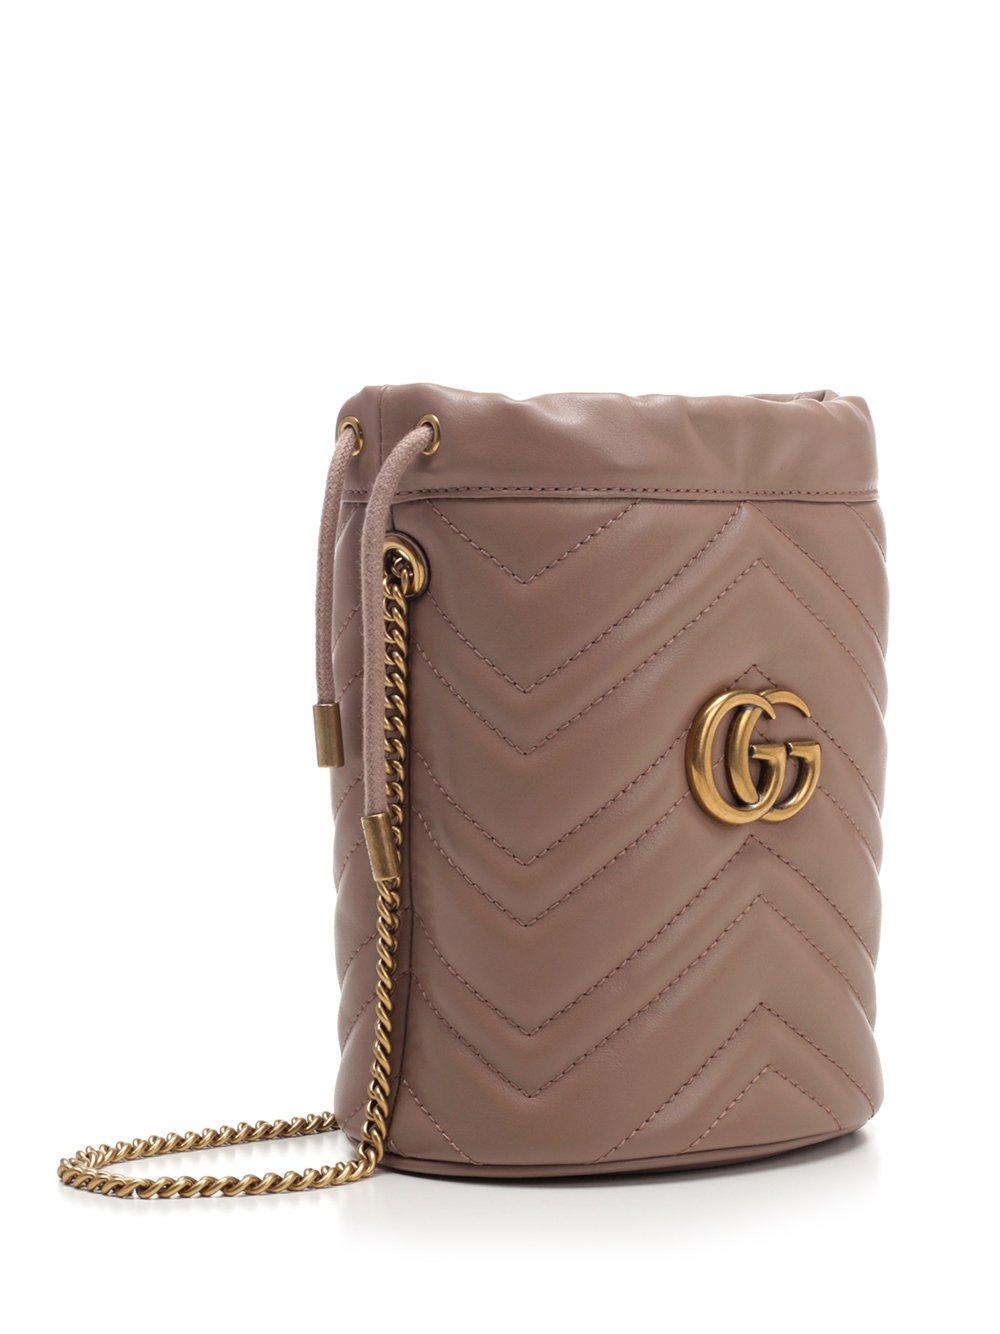 GUCCI GG Marmont mini quilted leather bucket bag  Bucket bag, Leather  crossbody bag, Black leather crossbody bag